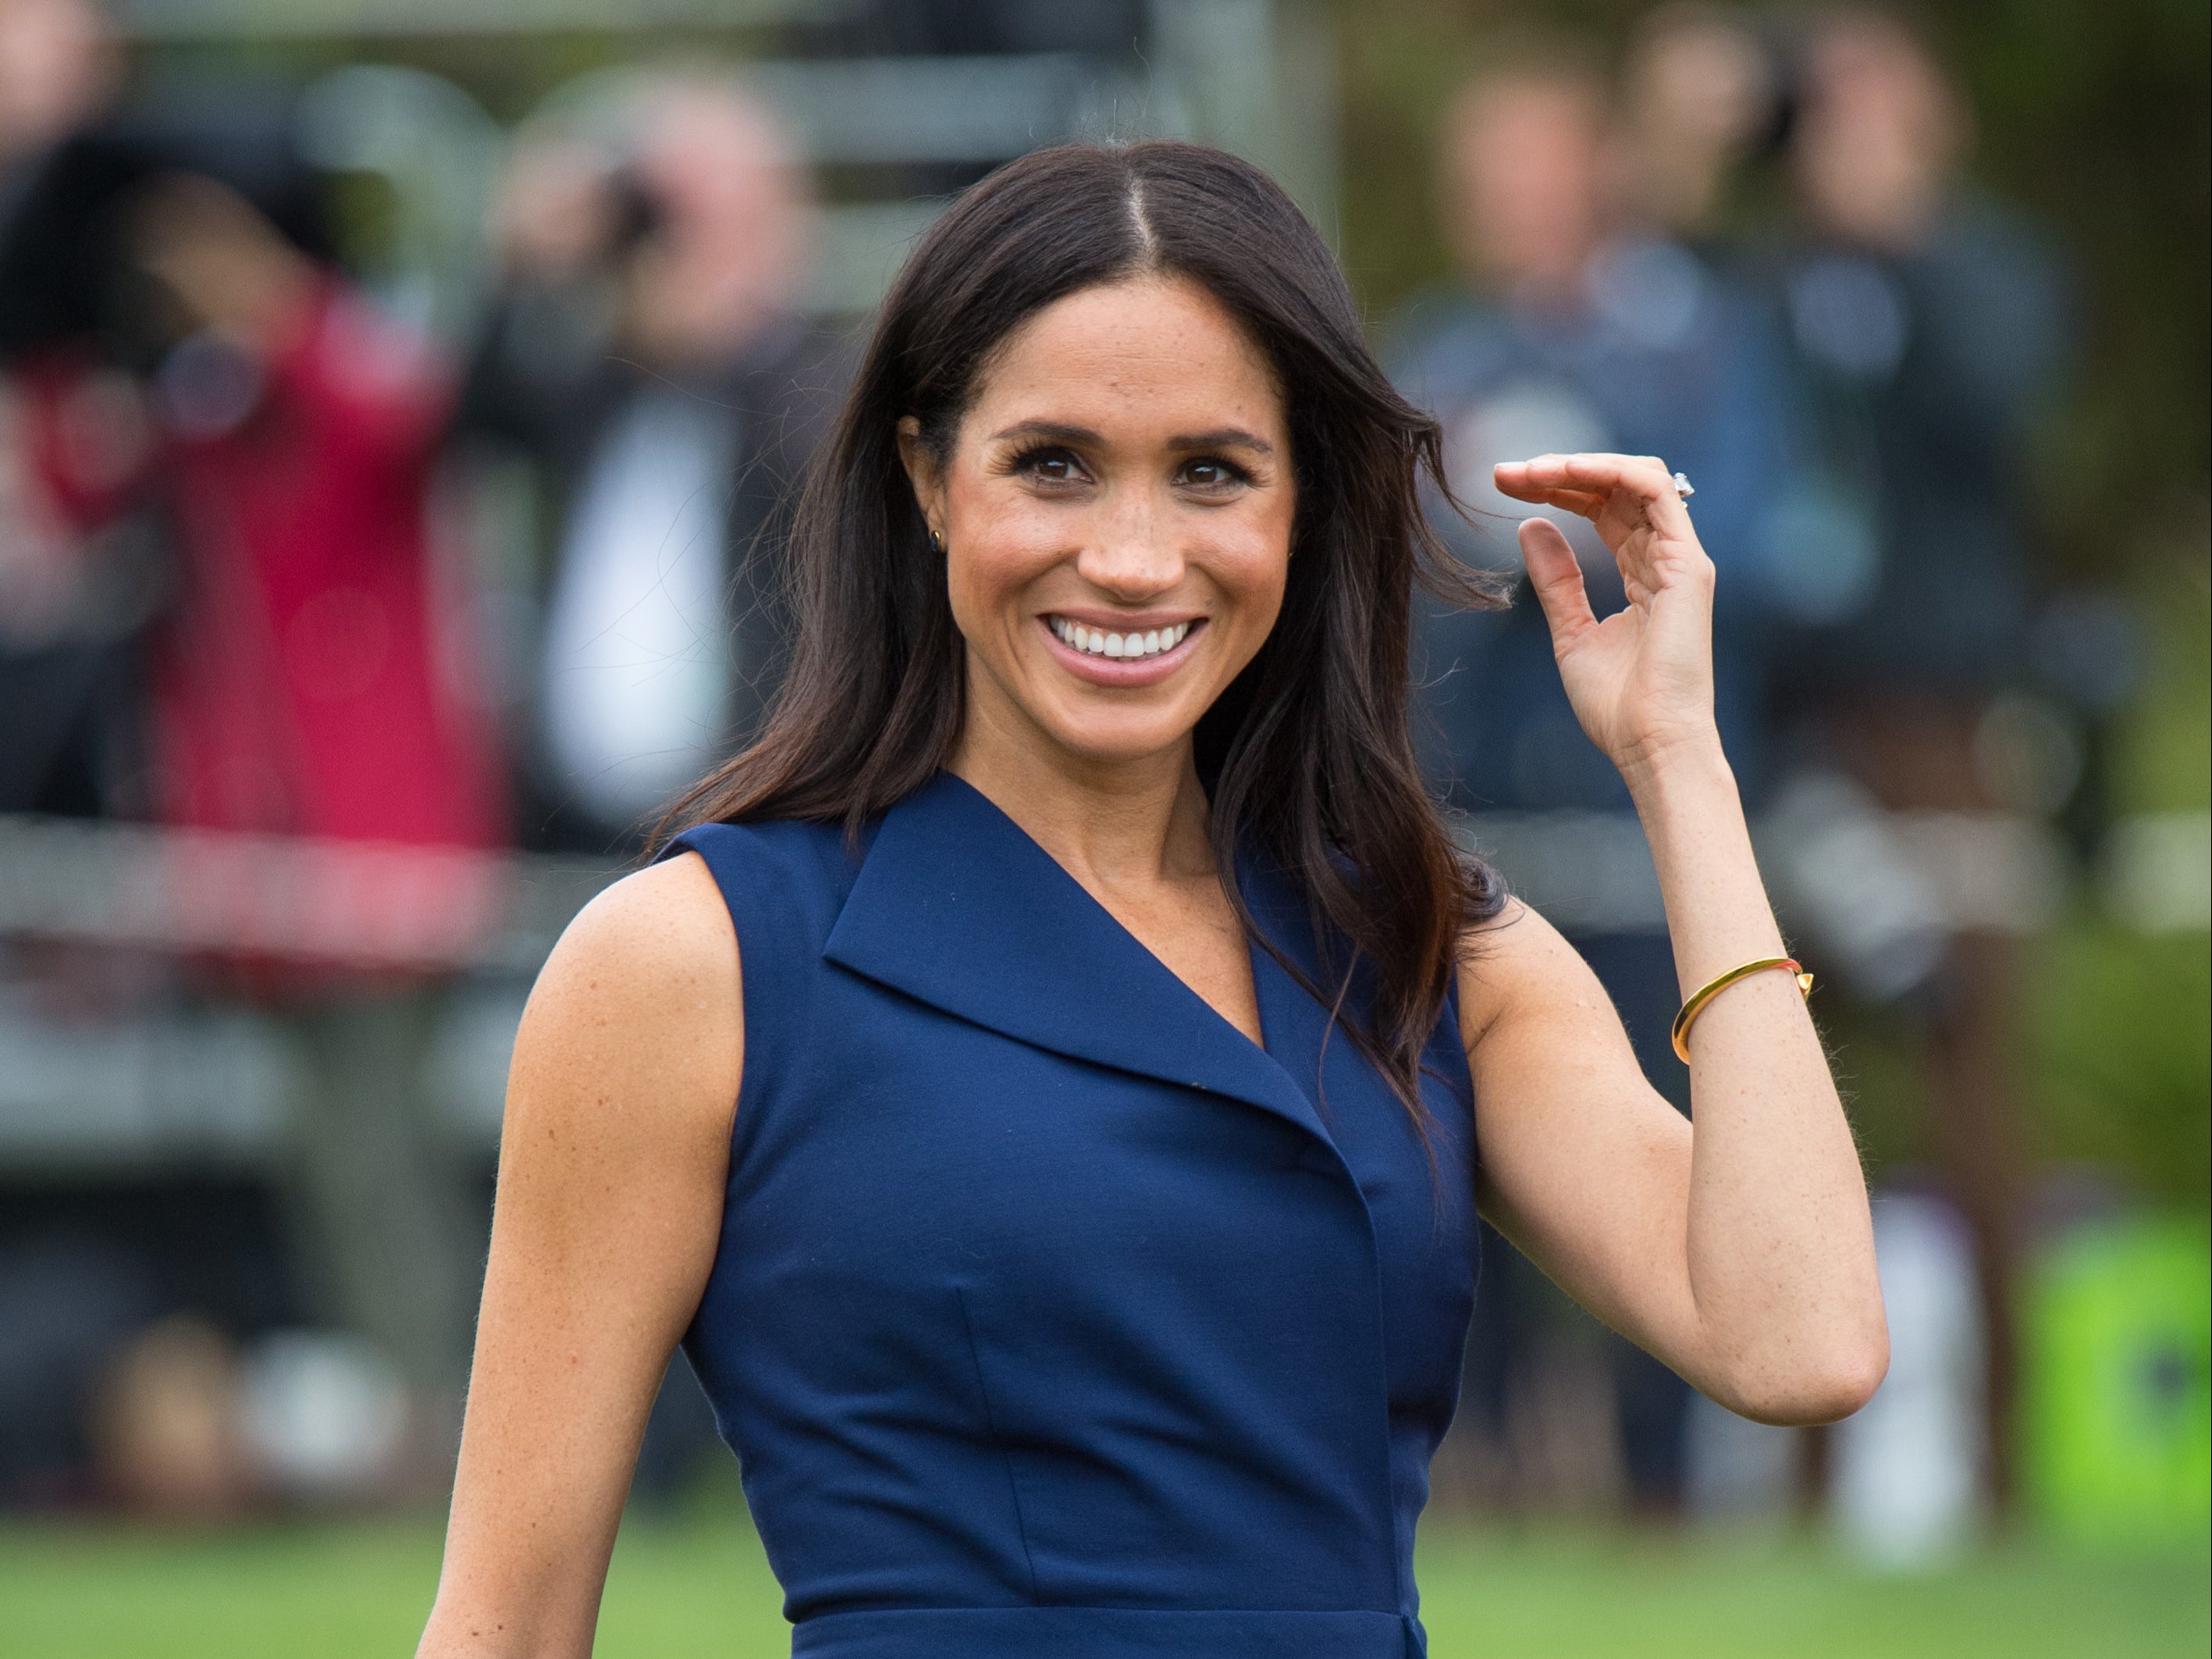 The article talked about Markle being ‘paraded naked through the streets of Britain’